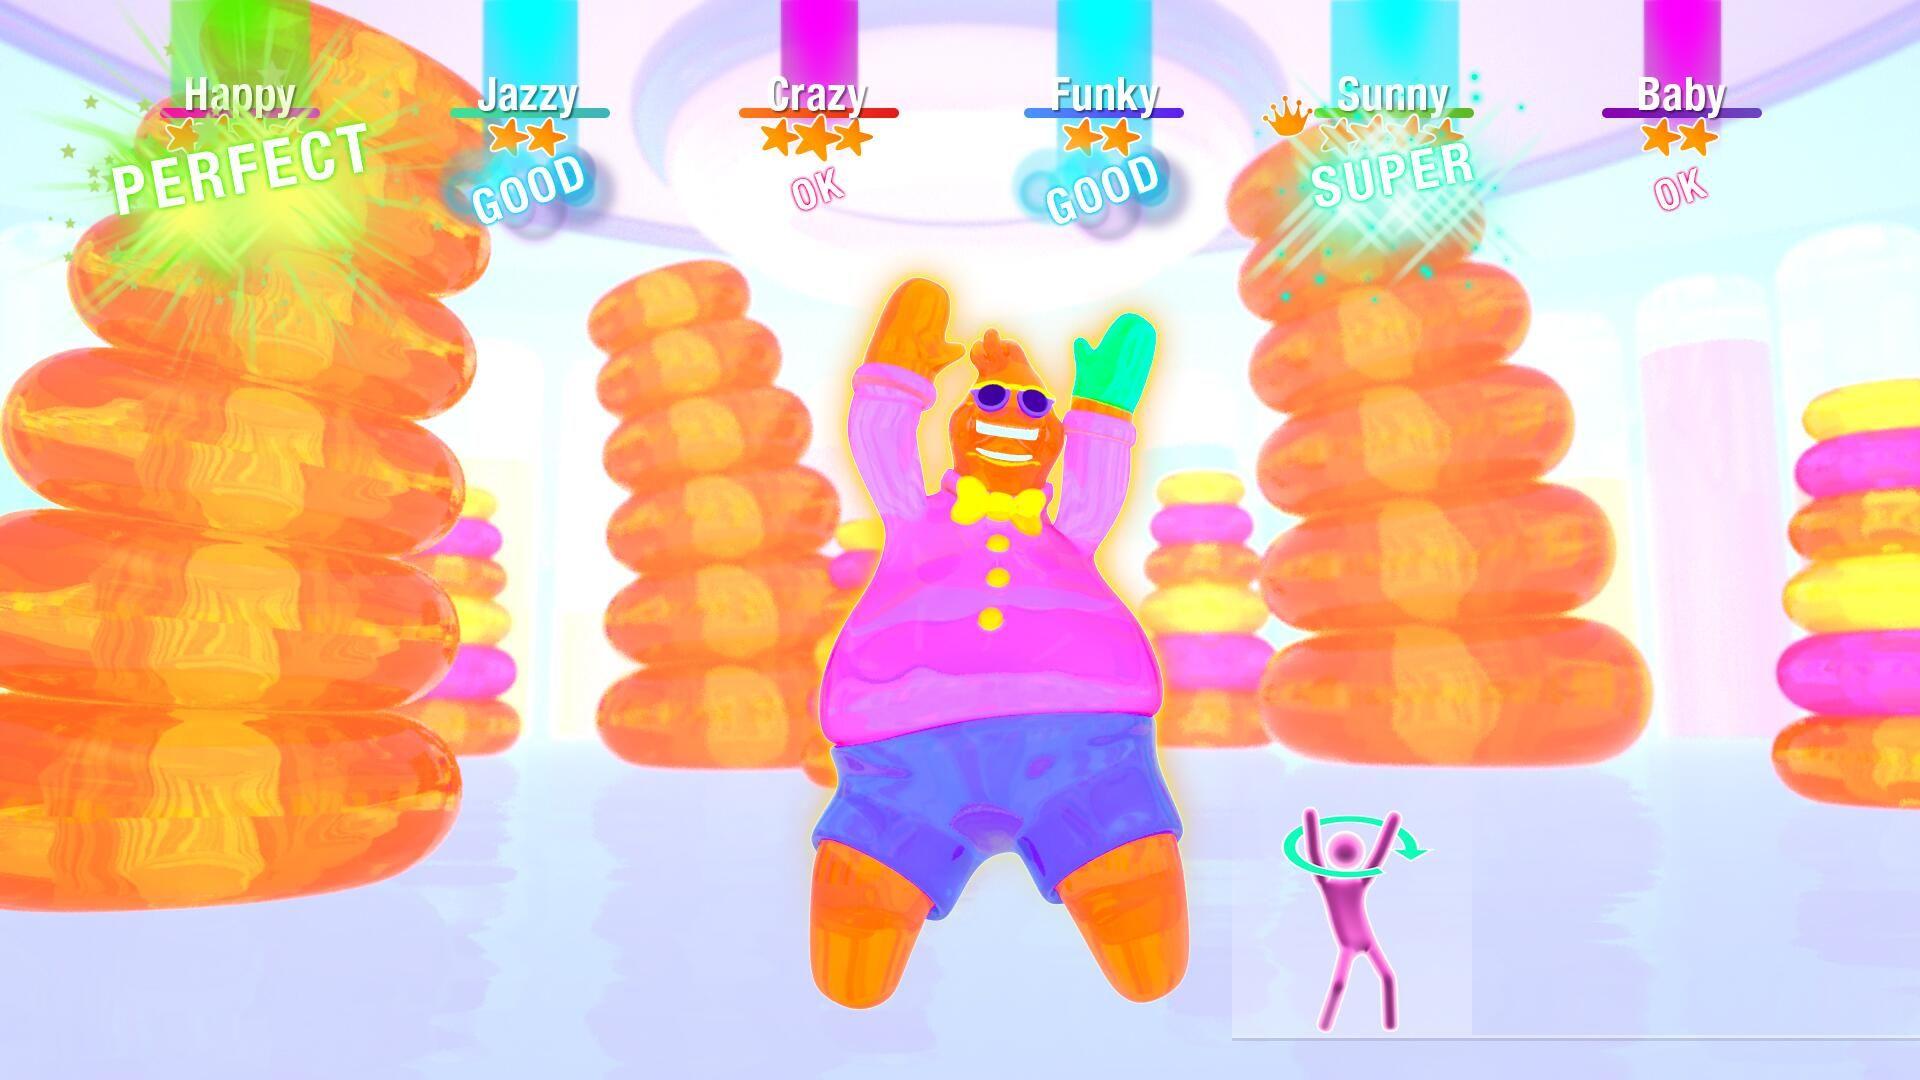 Just Dance 2019 Screens Let You Imagine the Beat